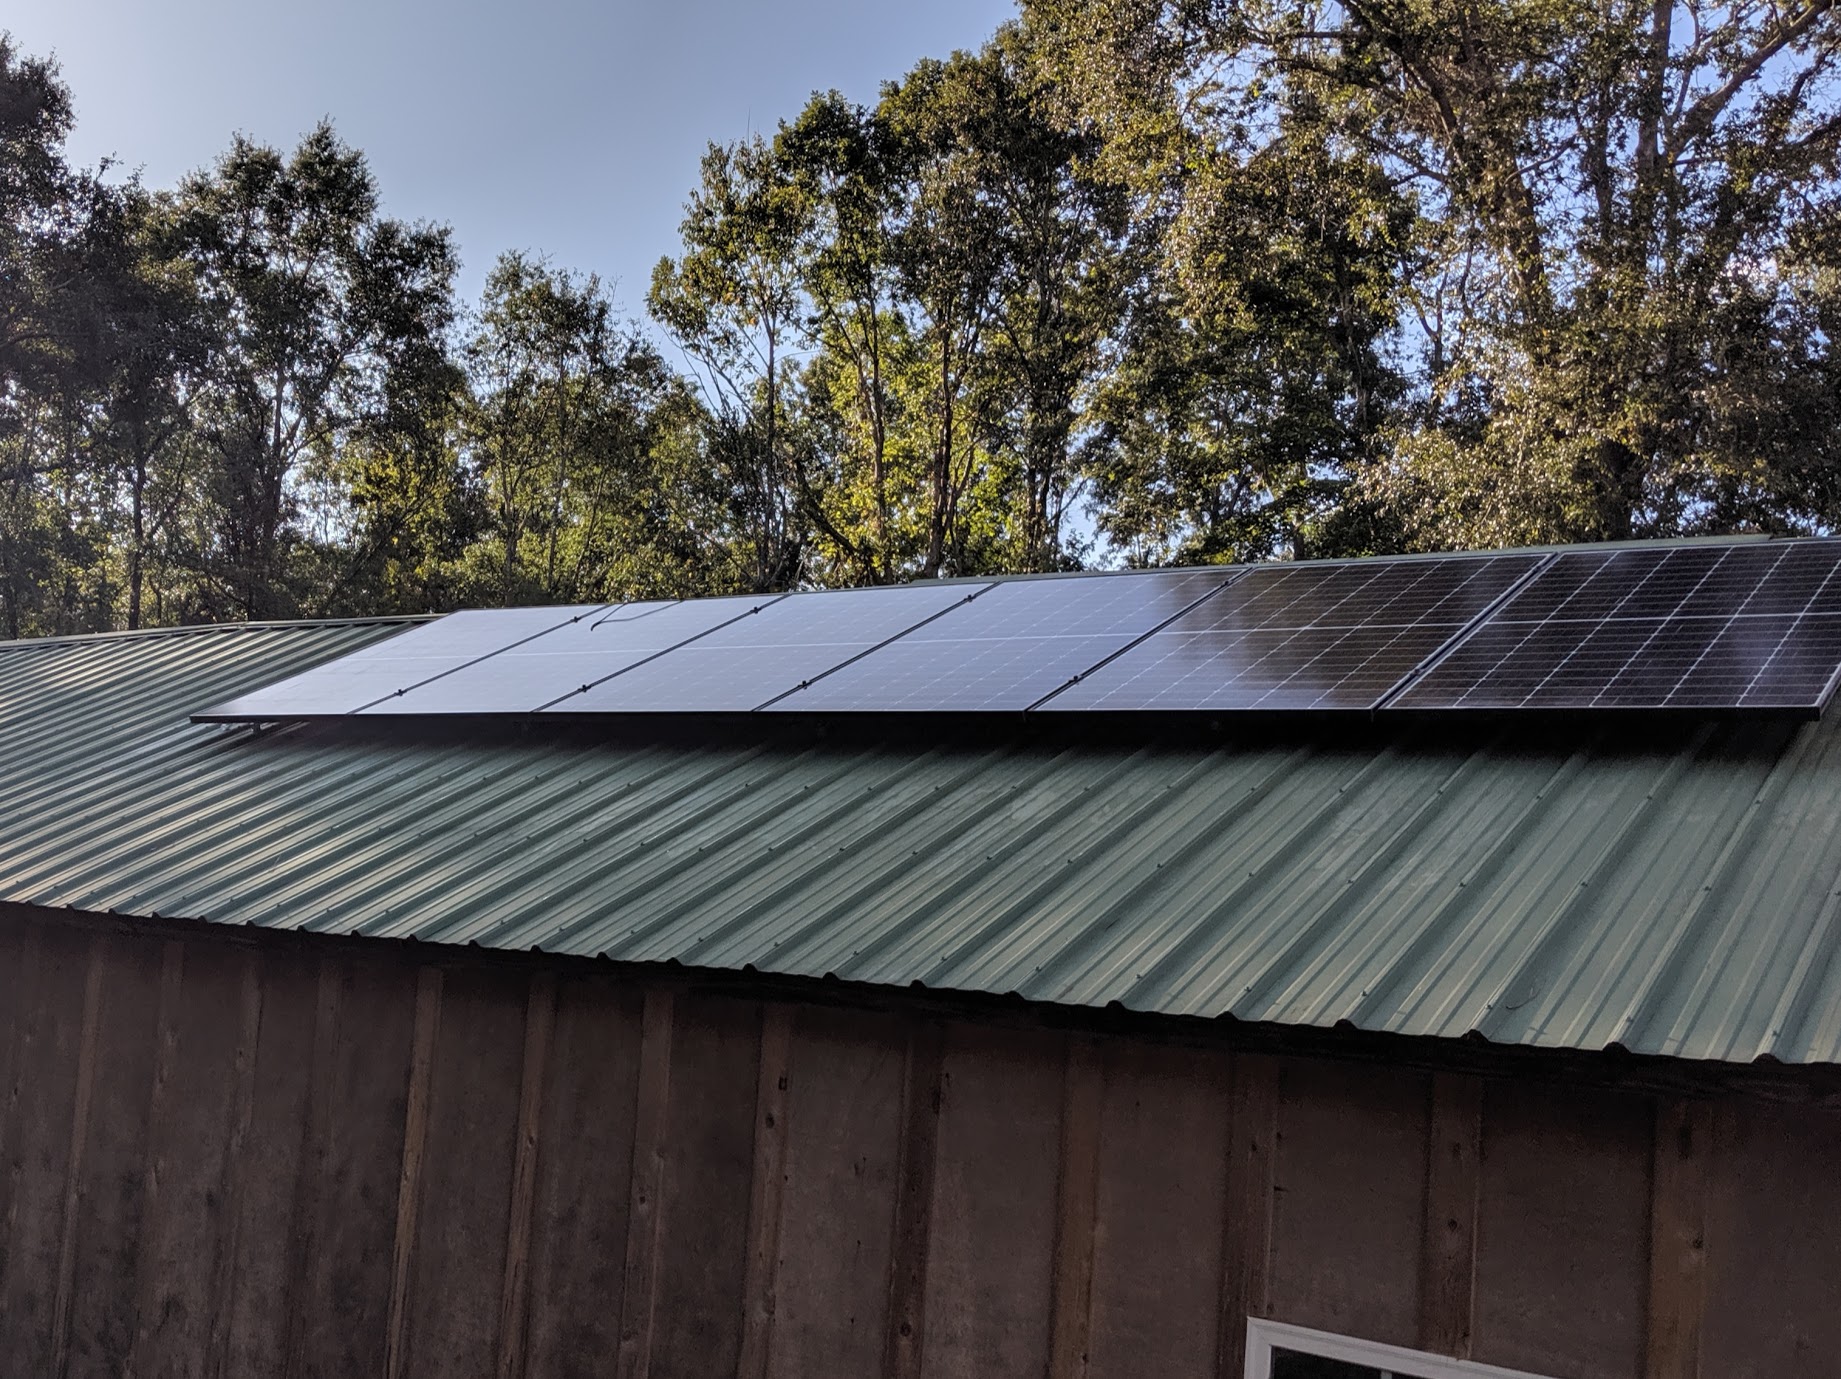 We used a sol-ark and fortress lithium ion batteries to bring poser to this off-grid farm outside of Albany, Georgia.